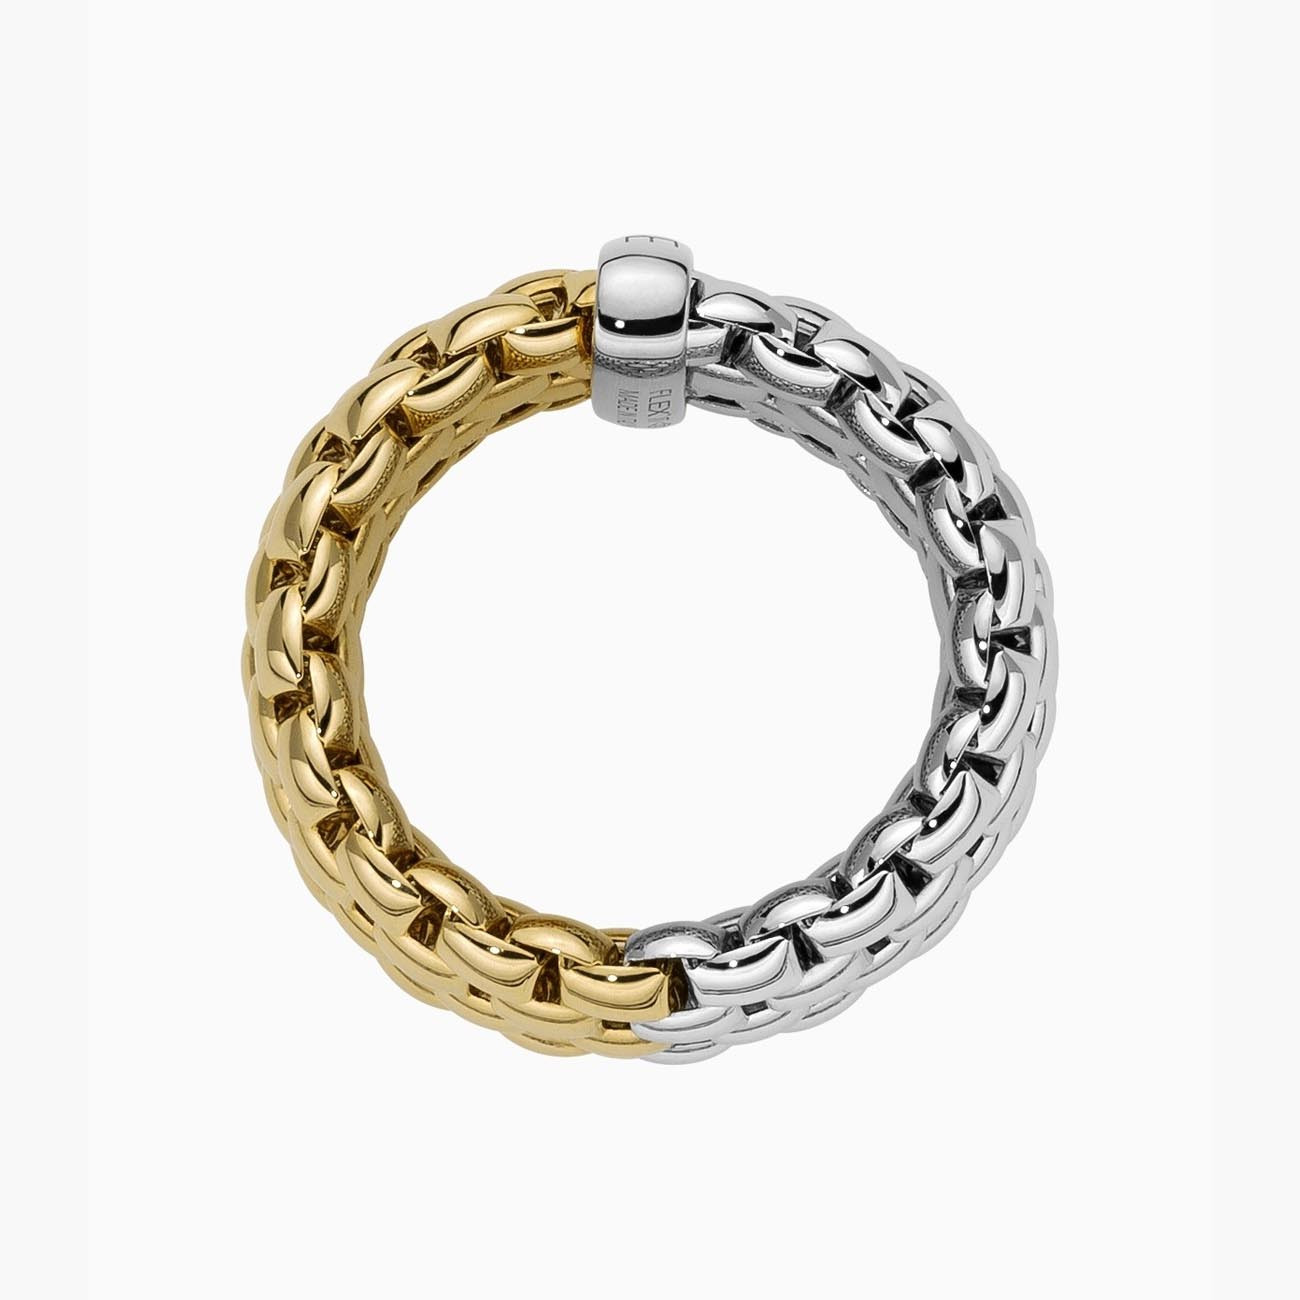 Fope Essentials Ring in White and Yellow Gold Profile Medium